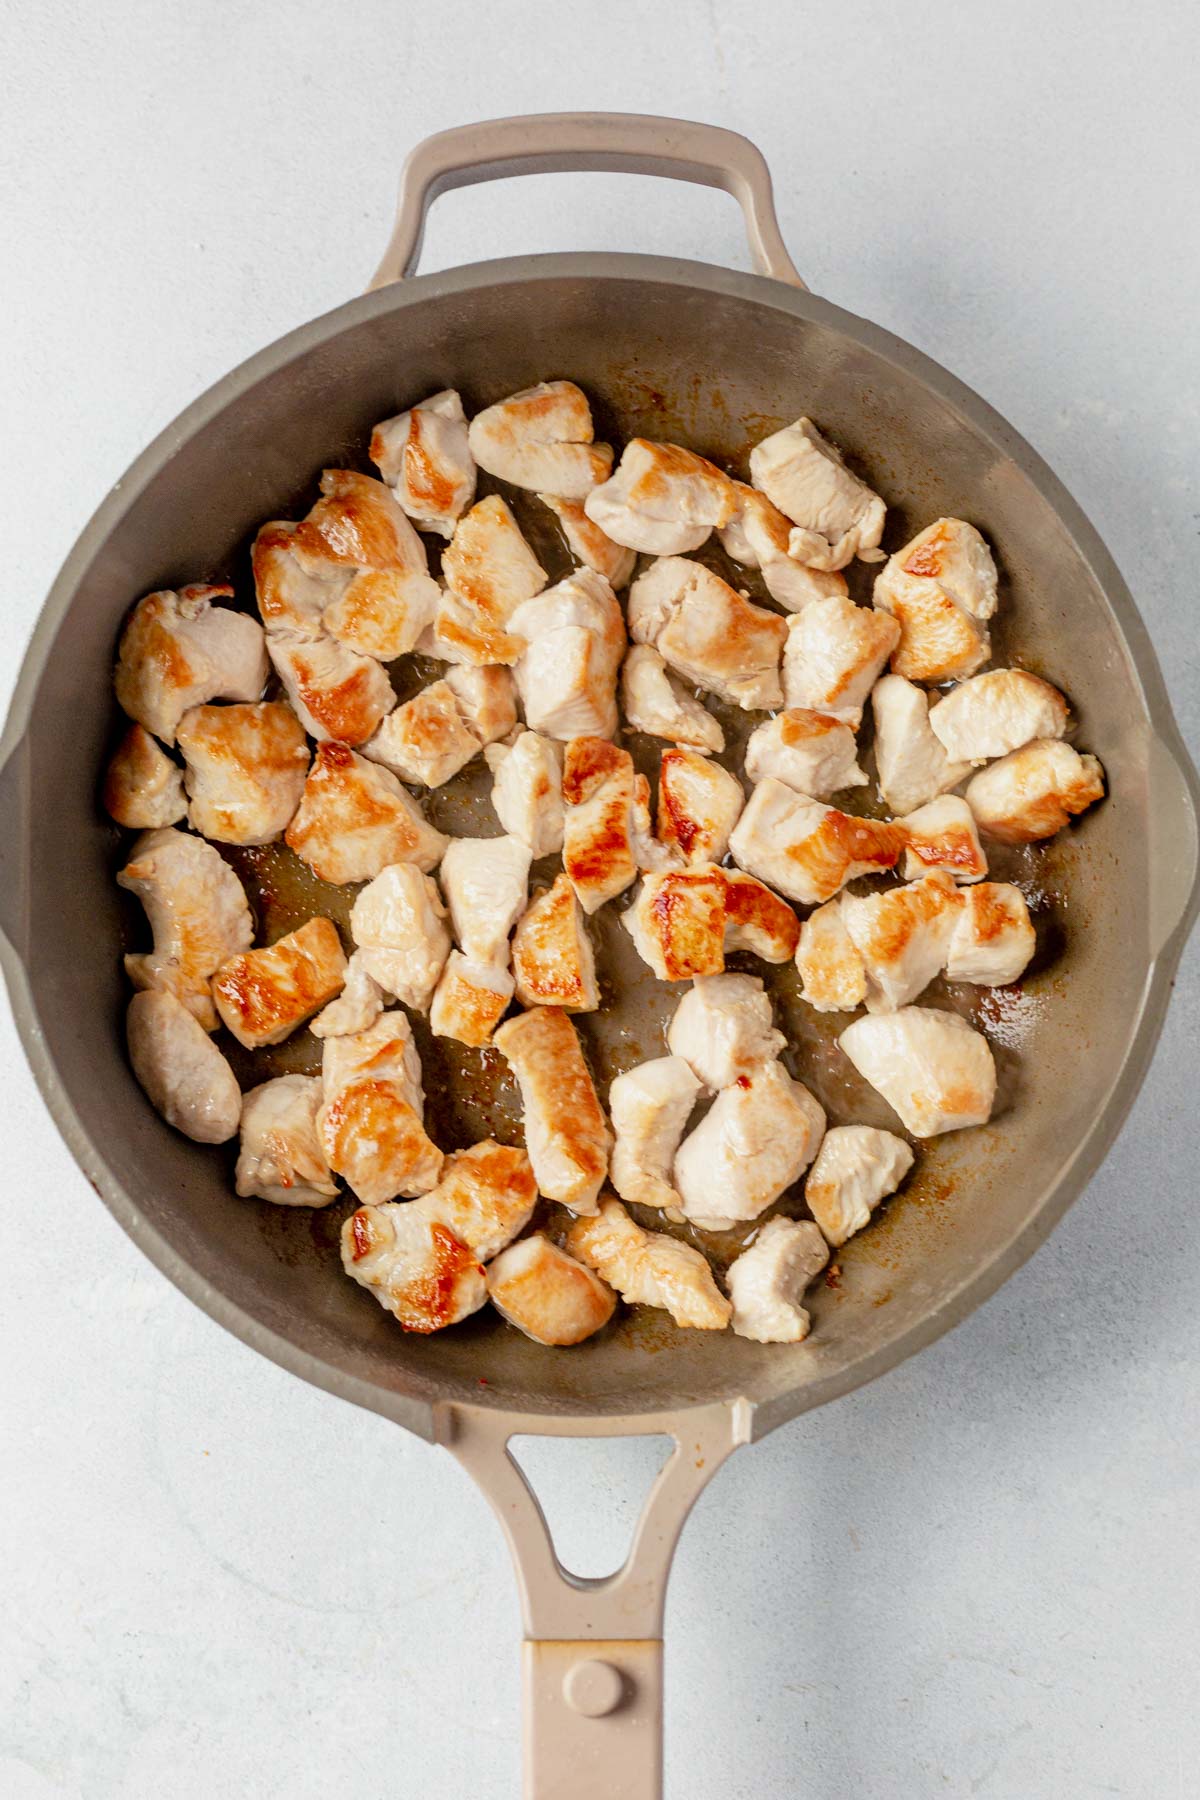 seared golden brown chicken chunks in a skillet